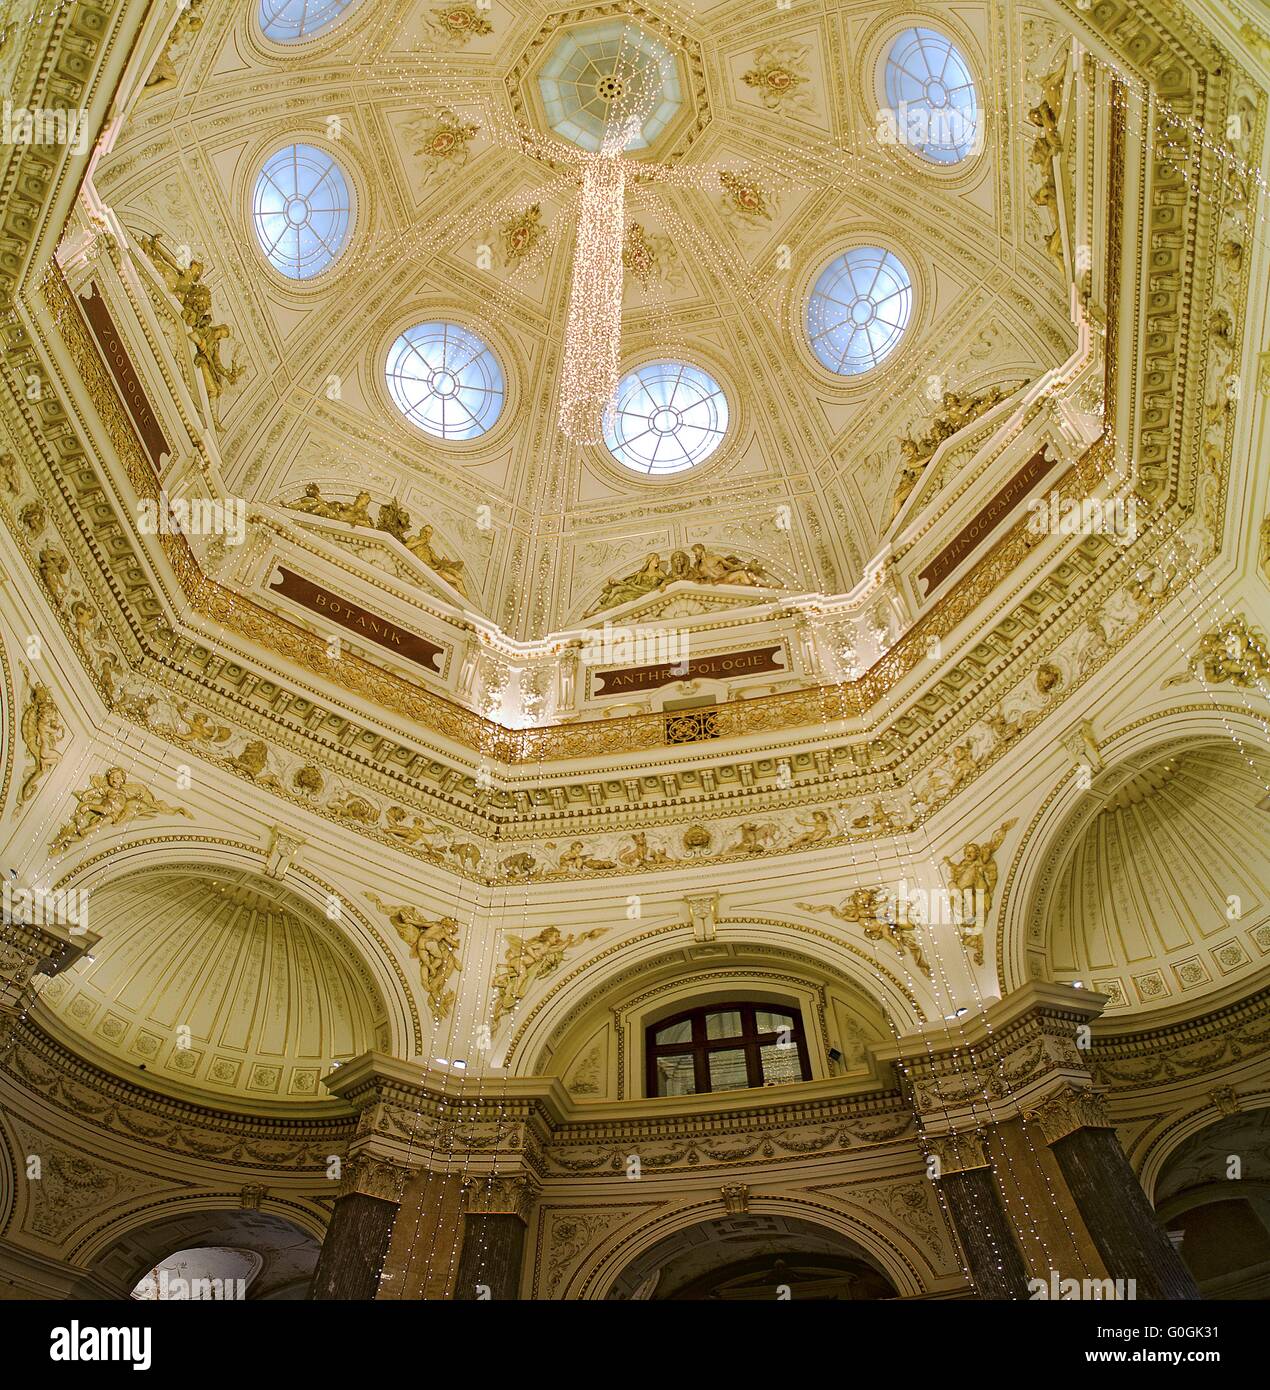 interior sight of the dome of the museum of natural history in Vienna Stock Photo